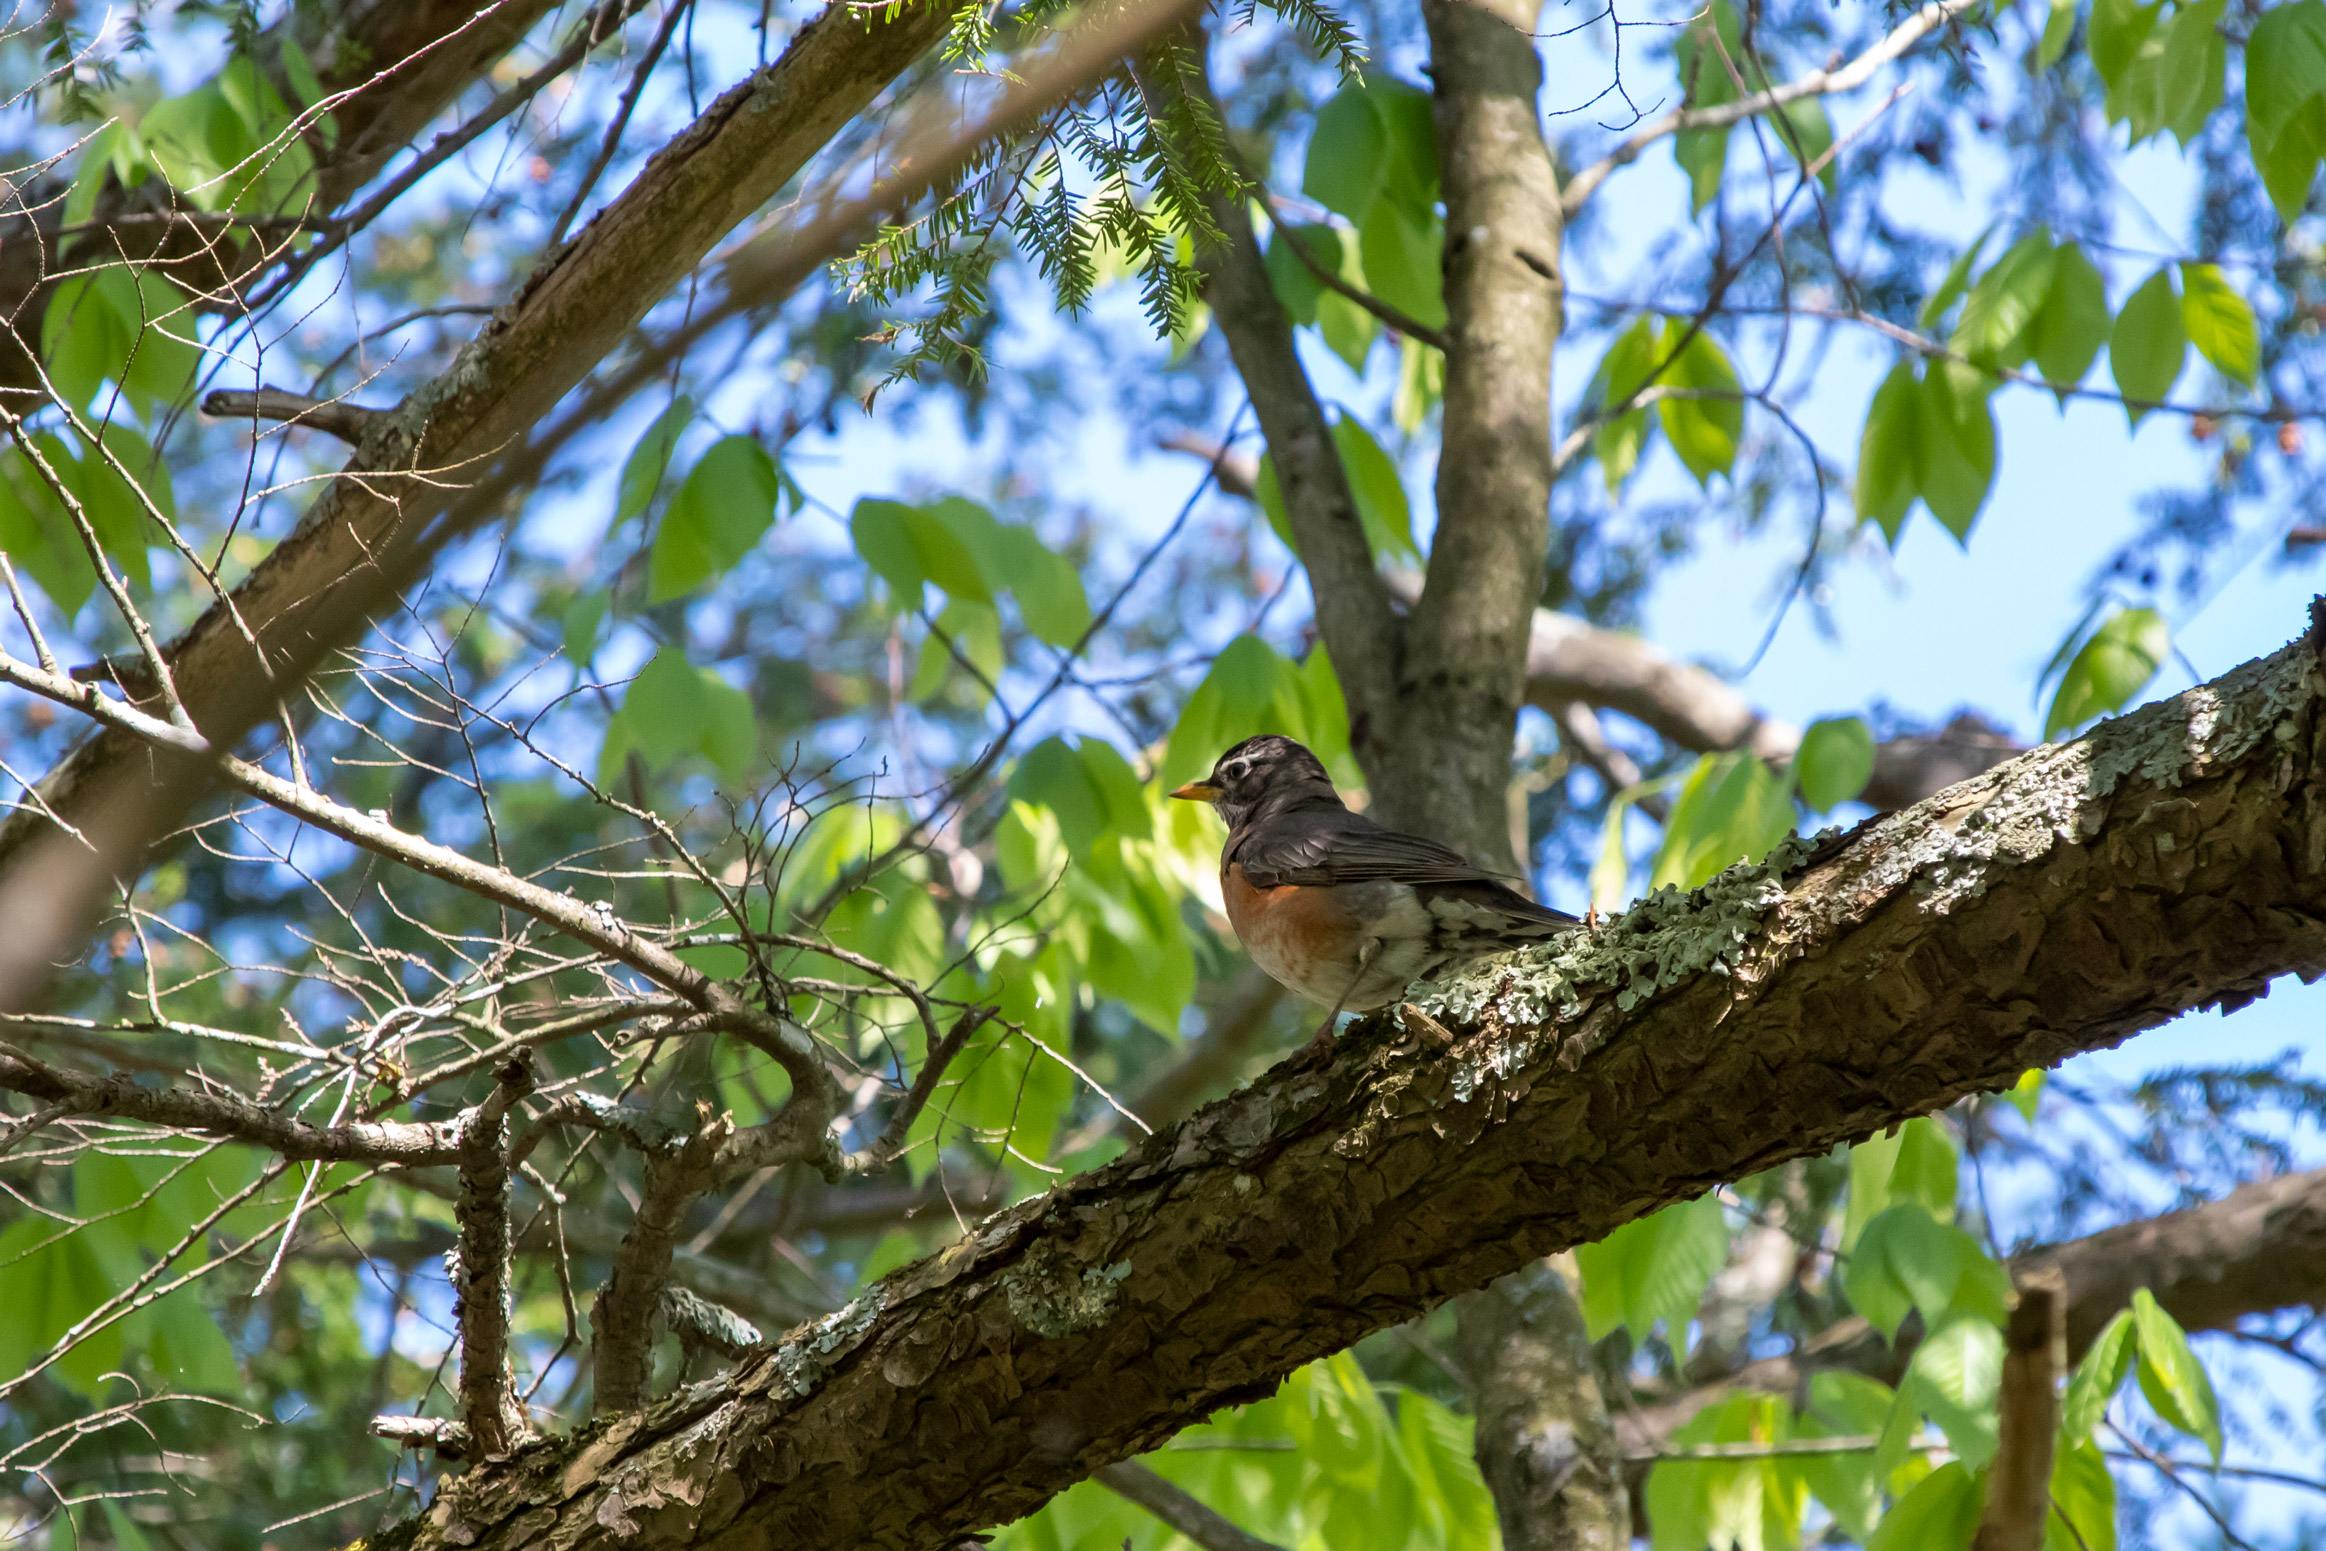 Young grey and orange bird in a tree